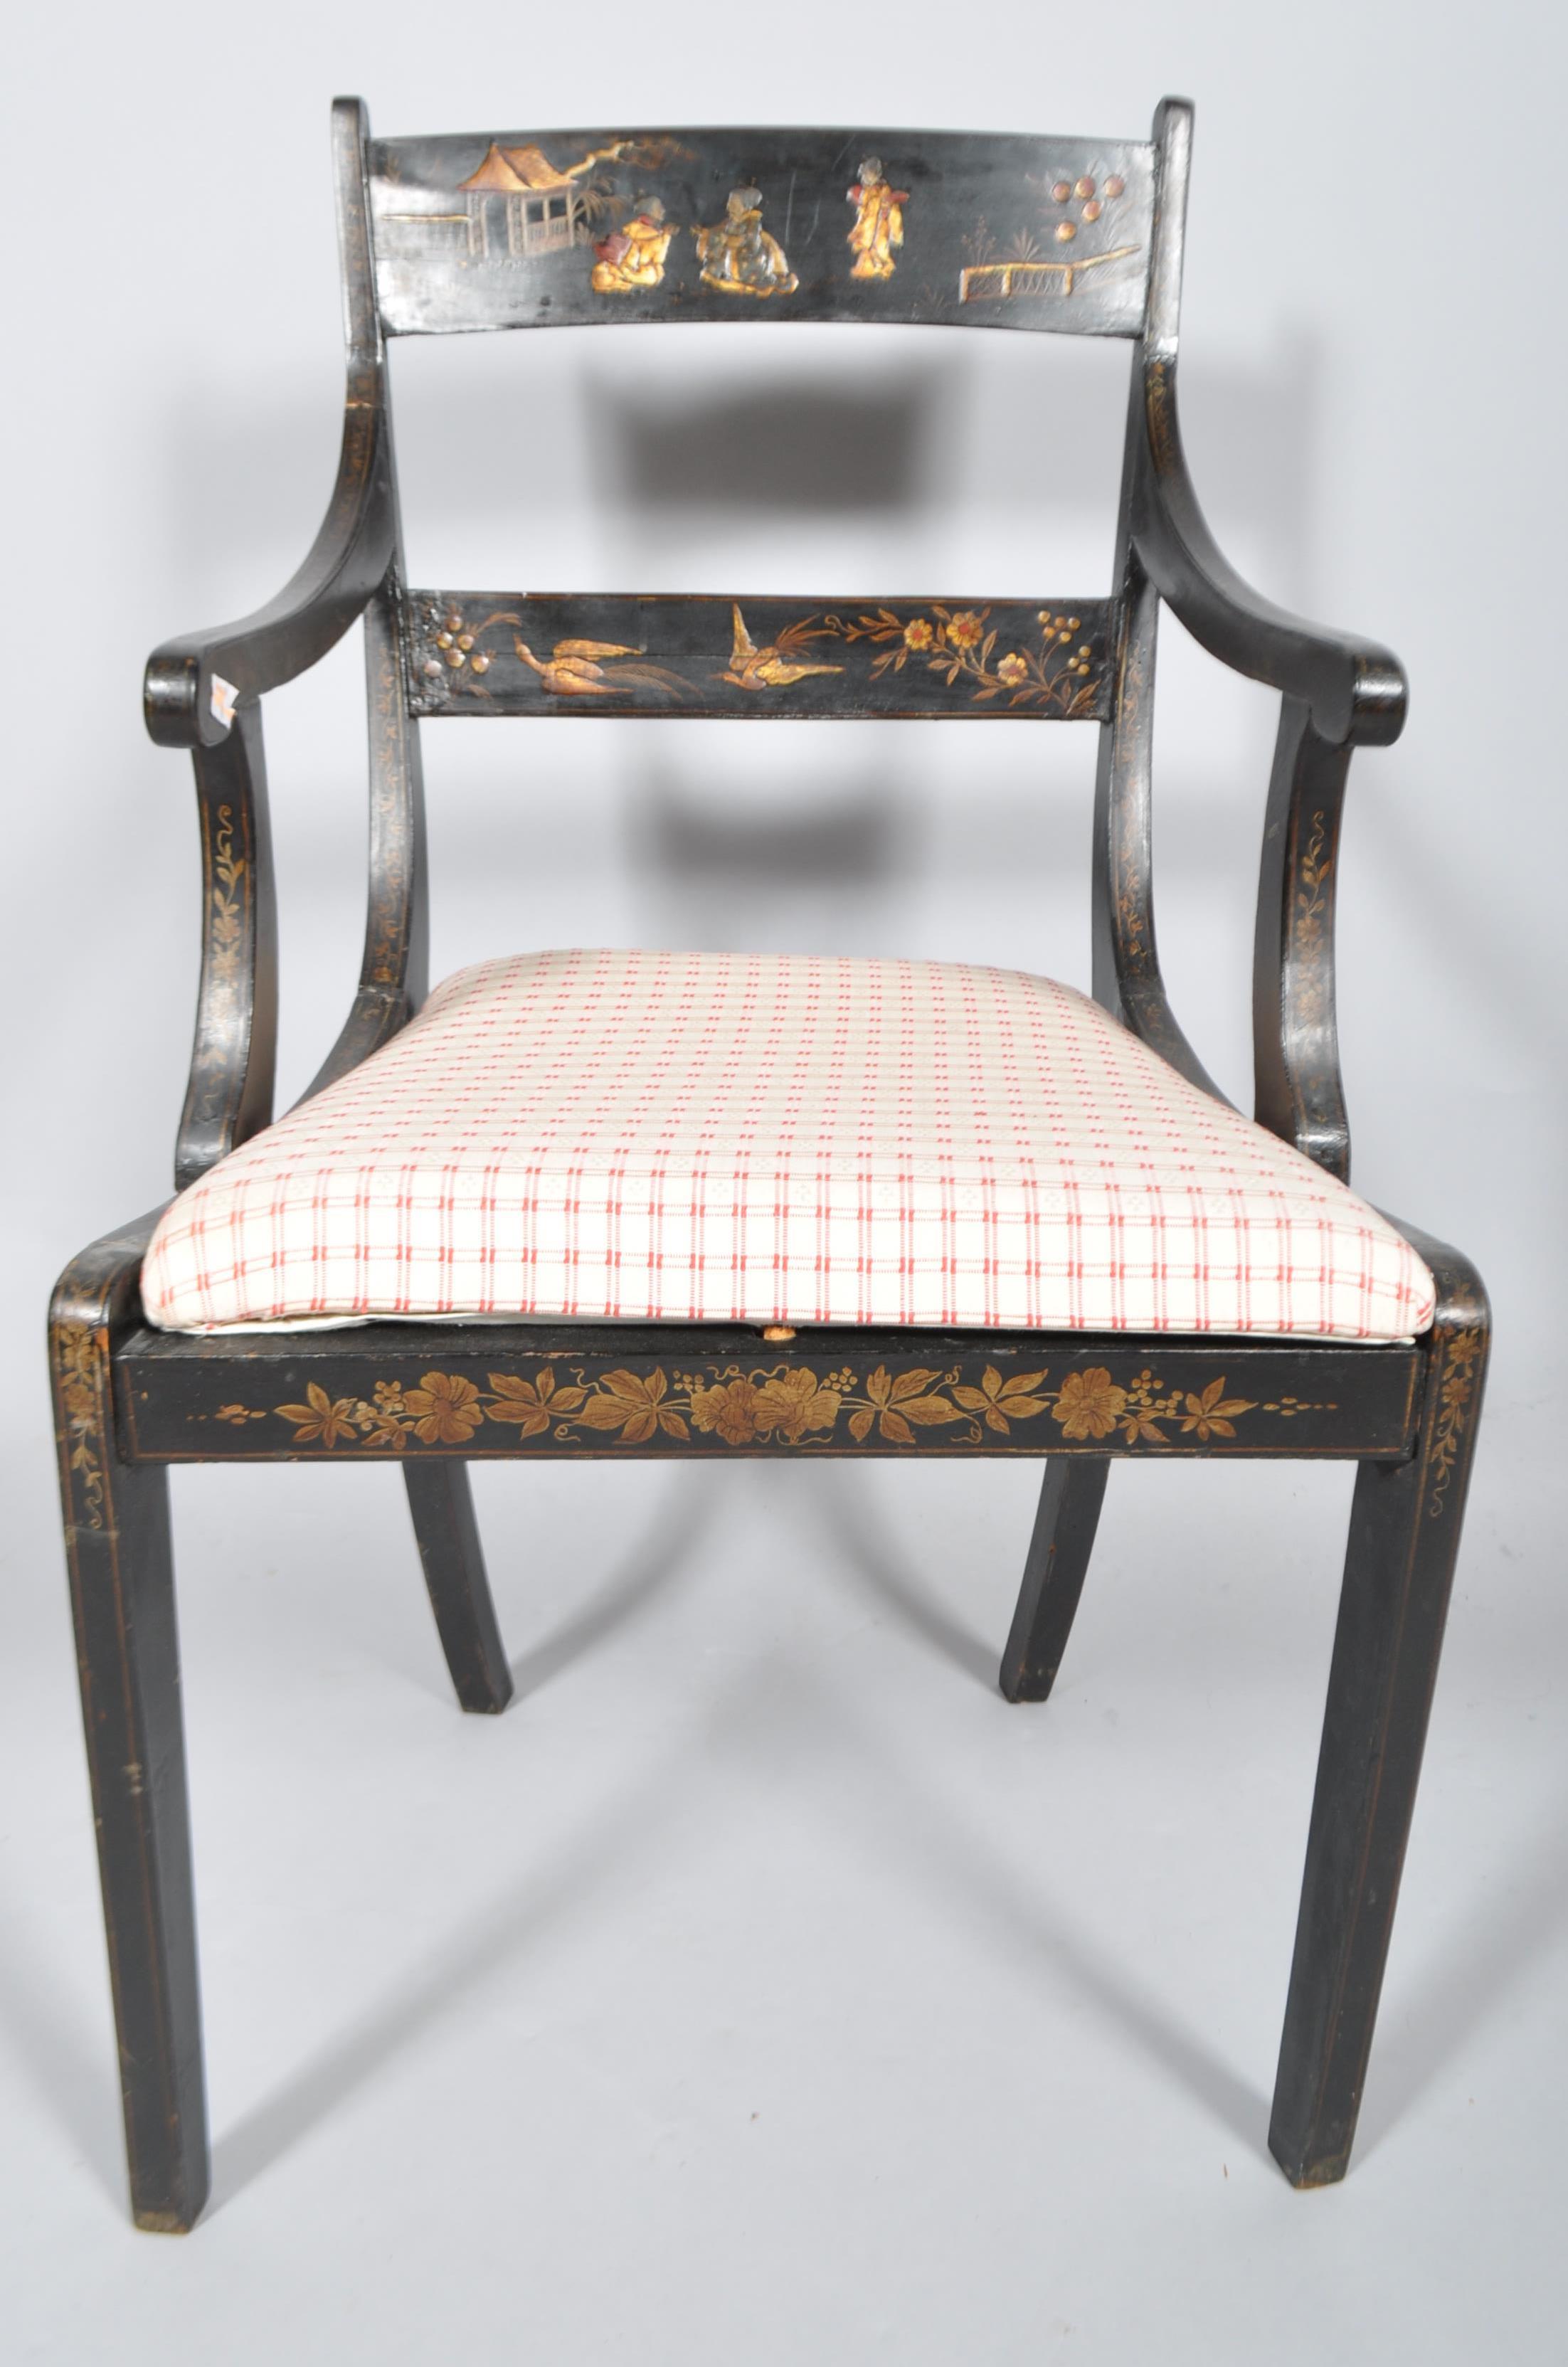 A regency-style japanned armchair, - Image 3 of 4